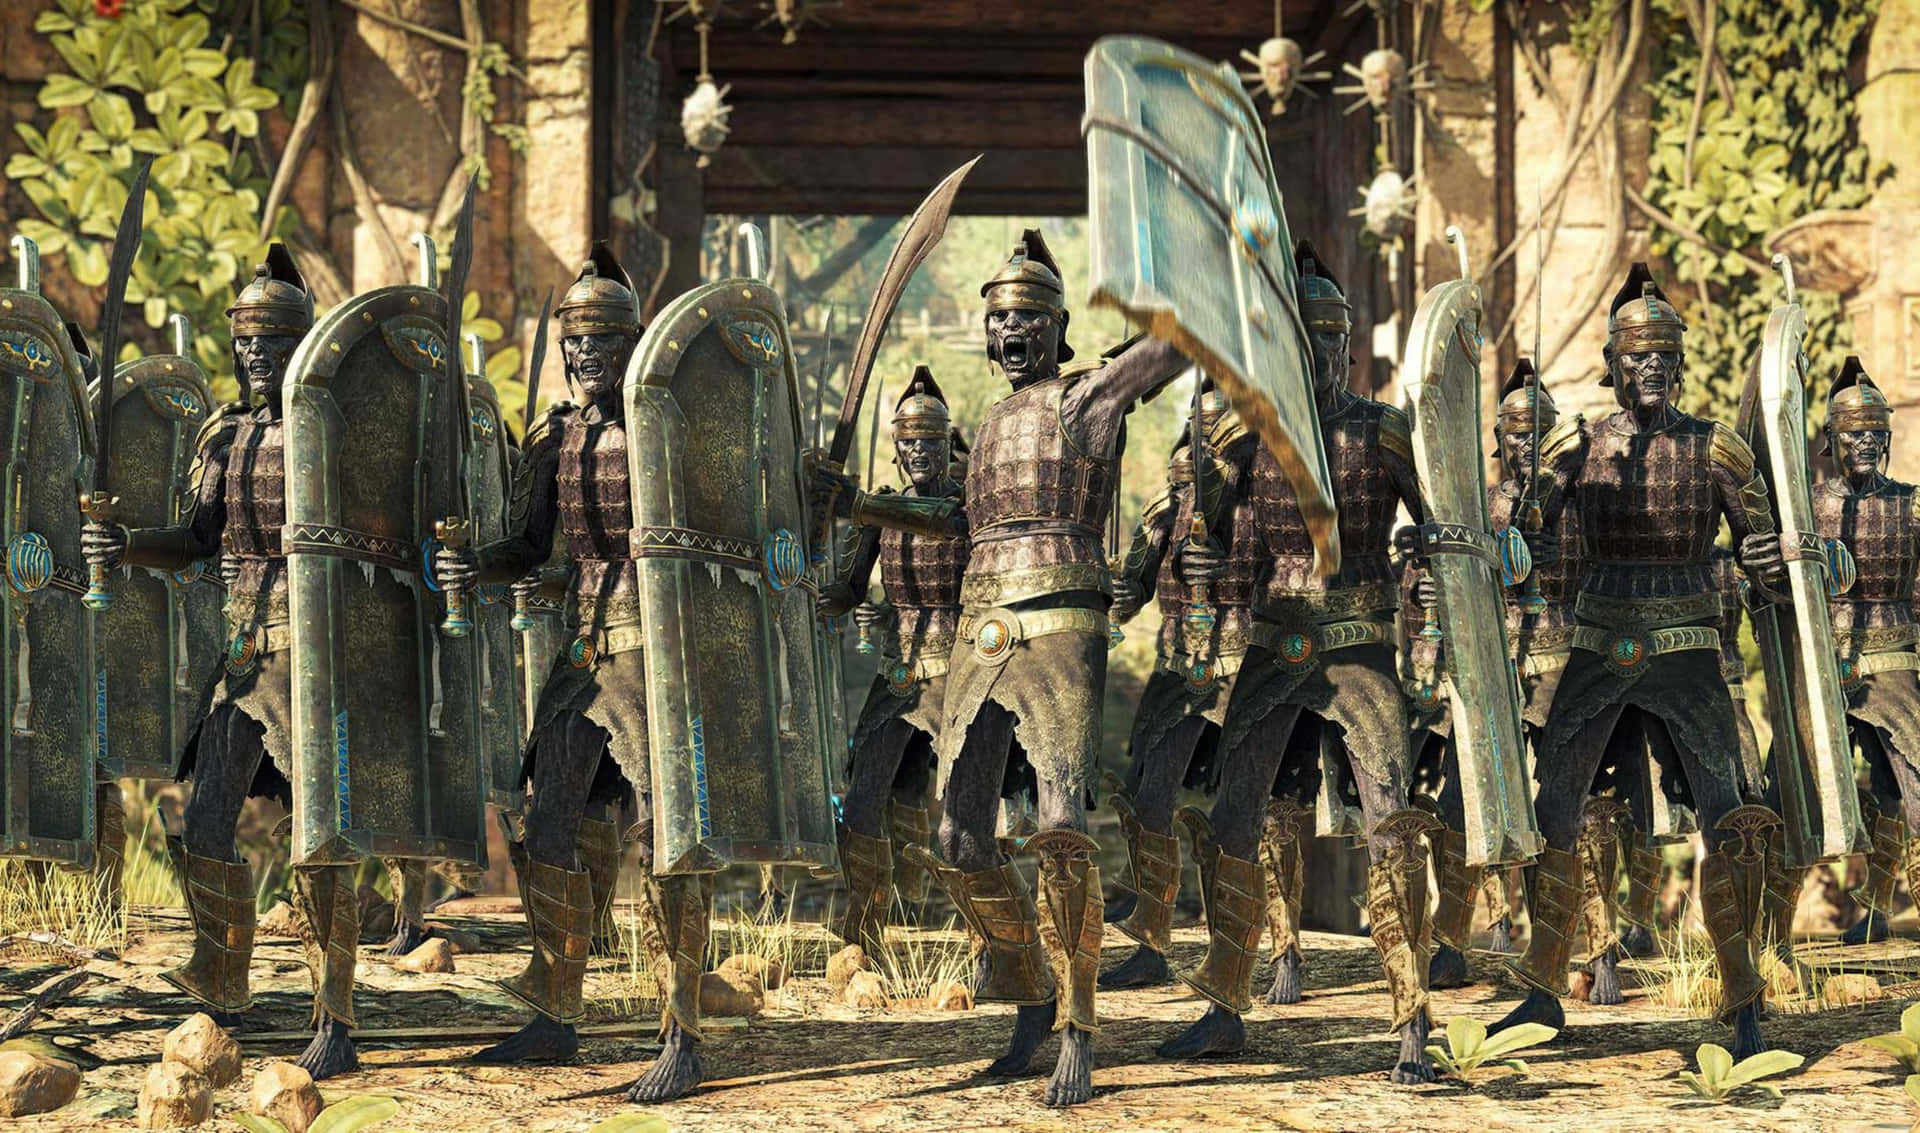 A Group Of Soldiers In Armor Standing In Front Of A Tree